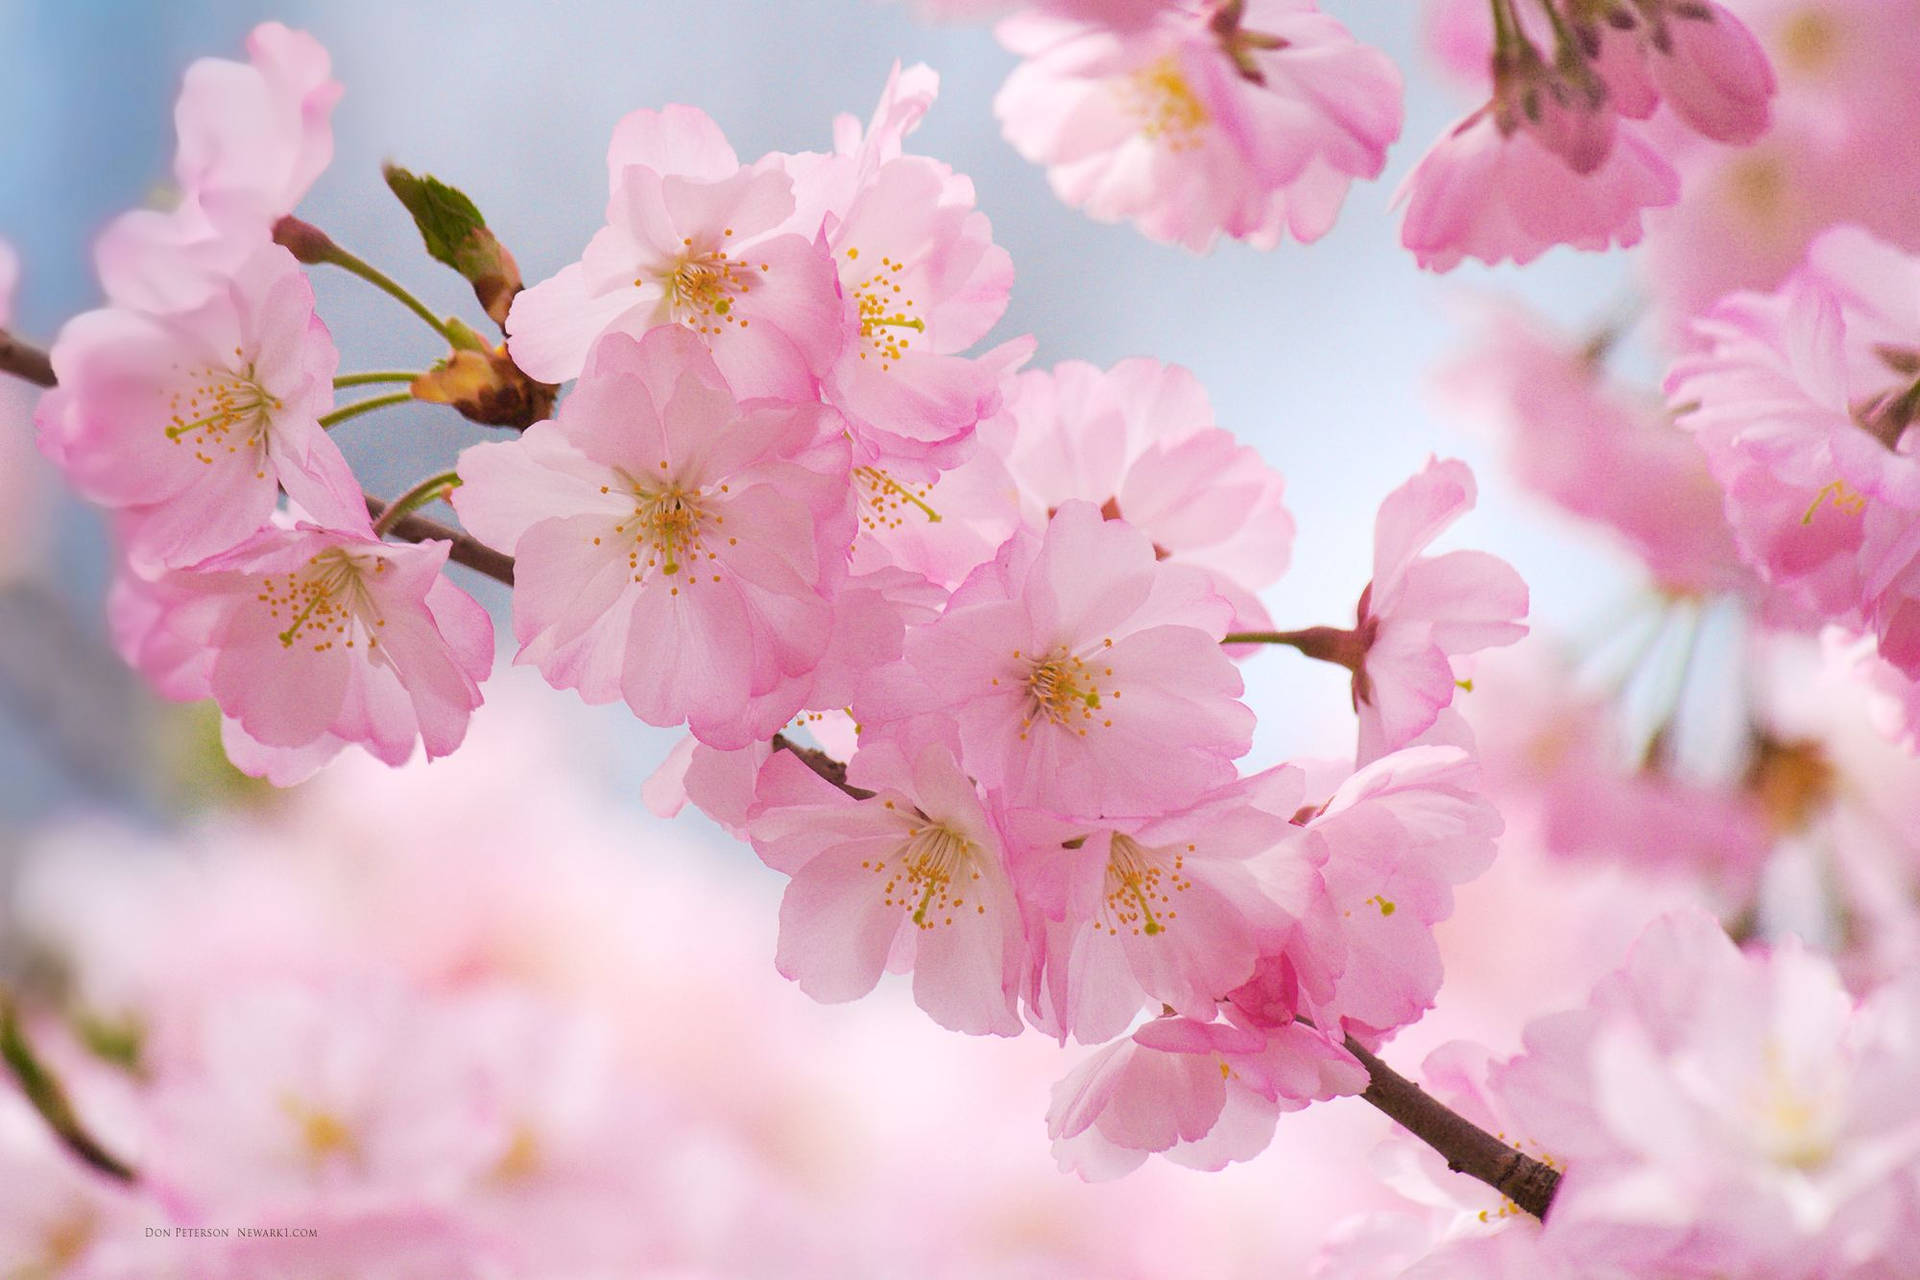 A close up of some pink flowers - Cherry blossom